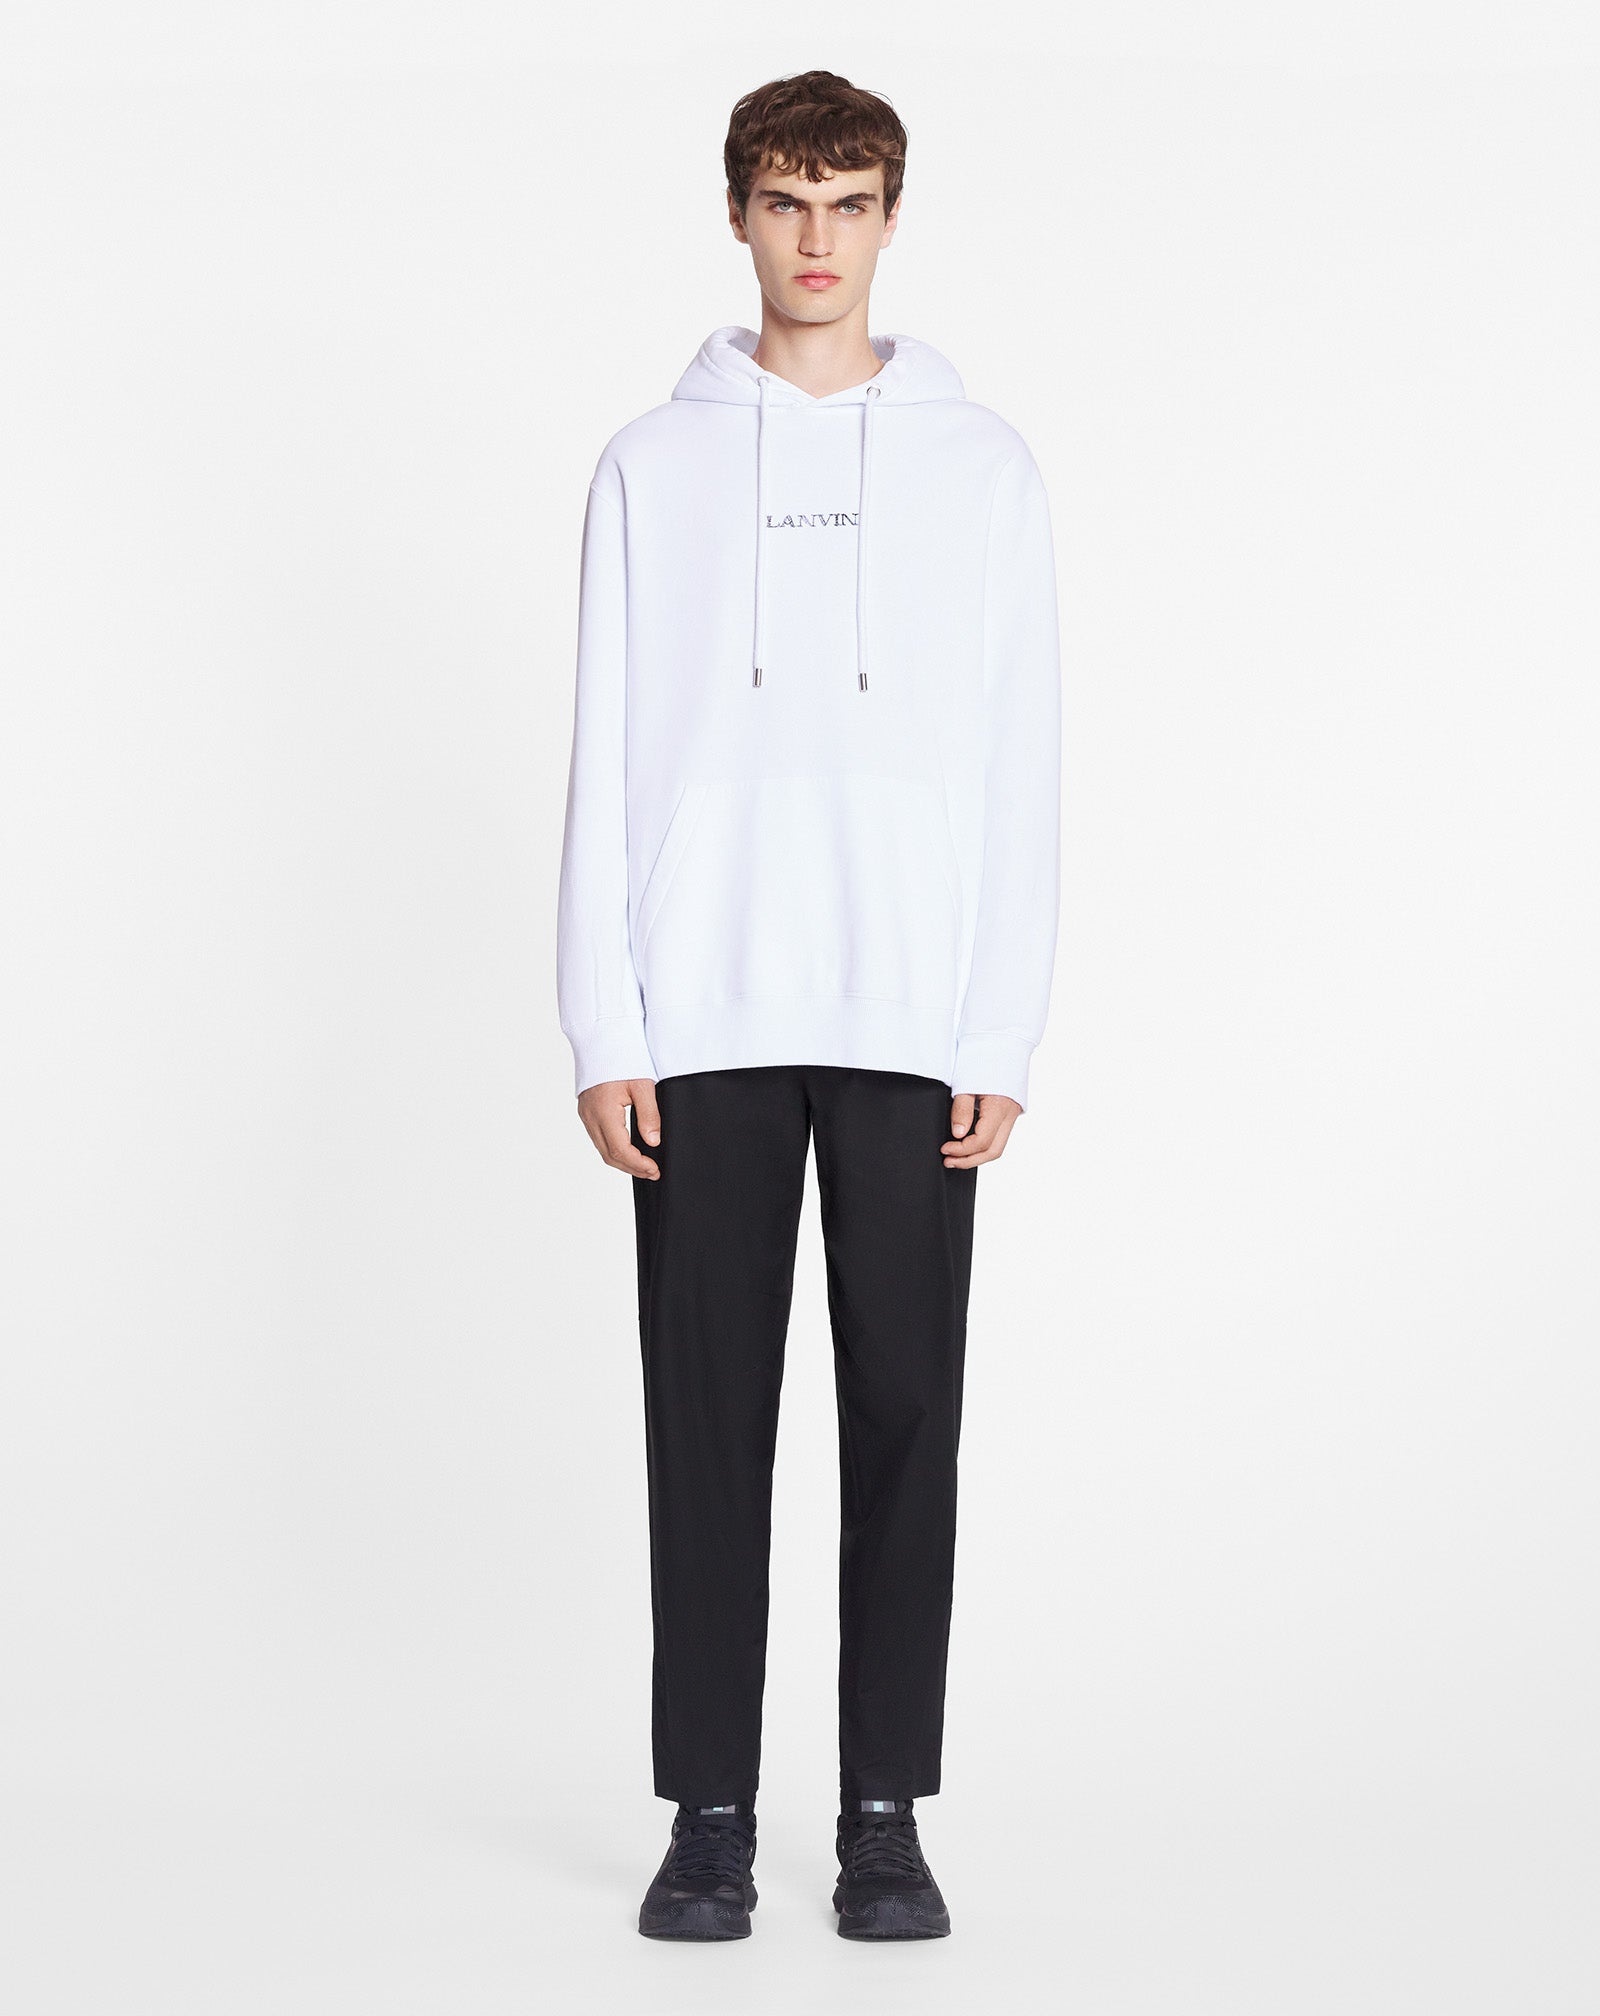 LOOSE-FITTING HOODIE WITH LANVIN LOGO - 3